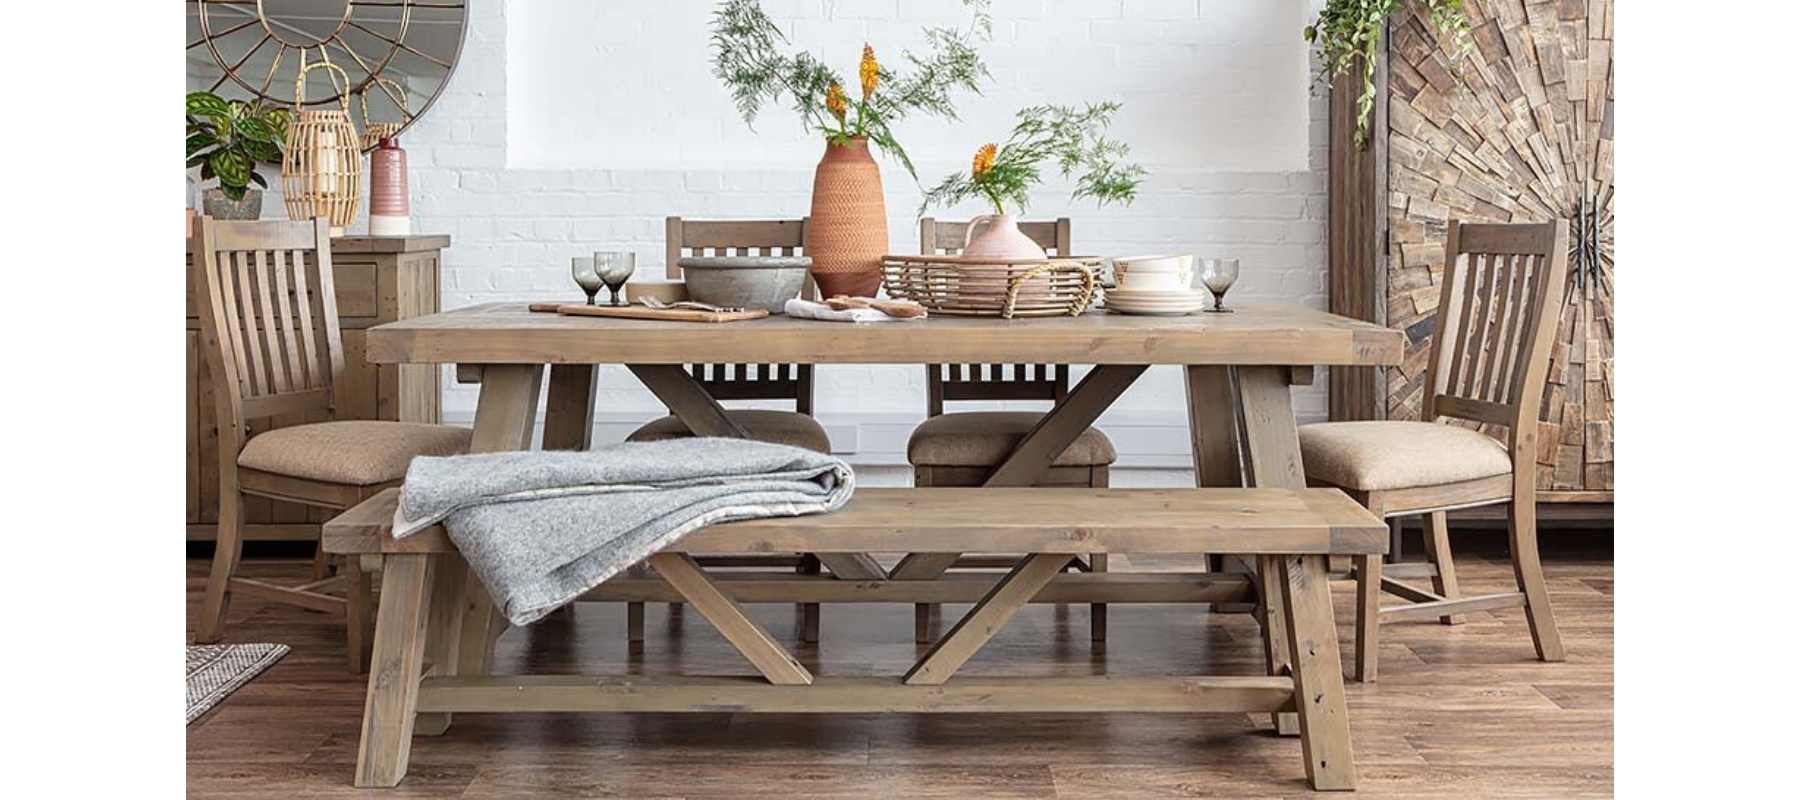 Wooden trestle table with wooden bench and terracotta vase